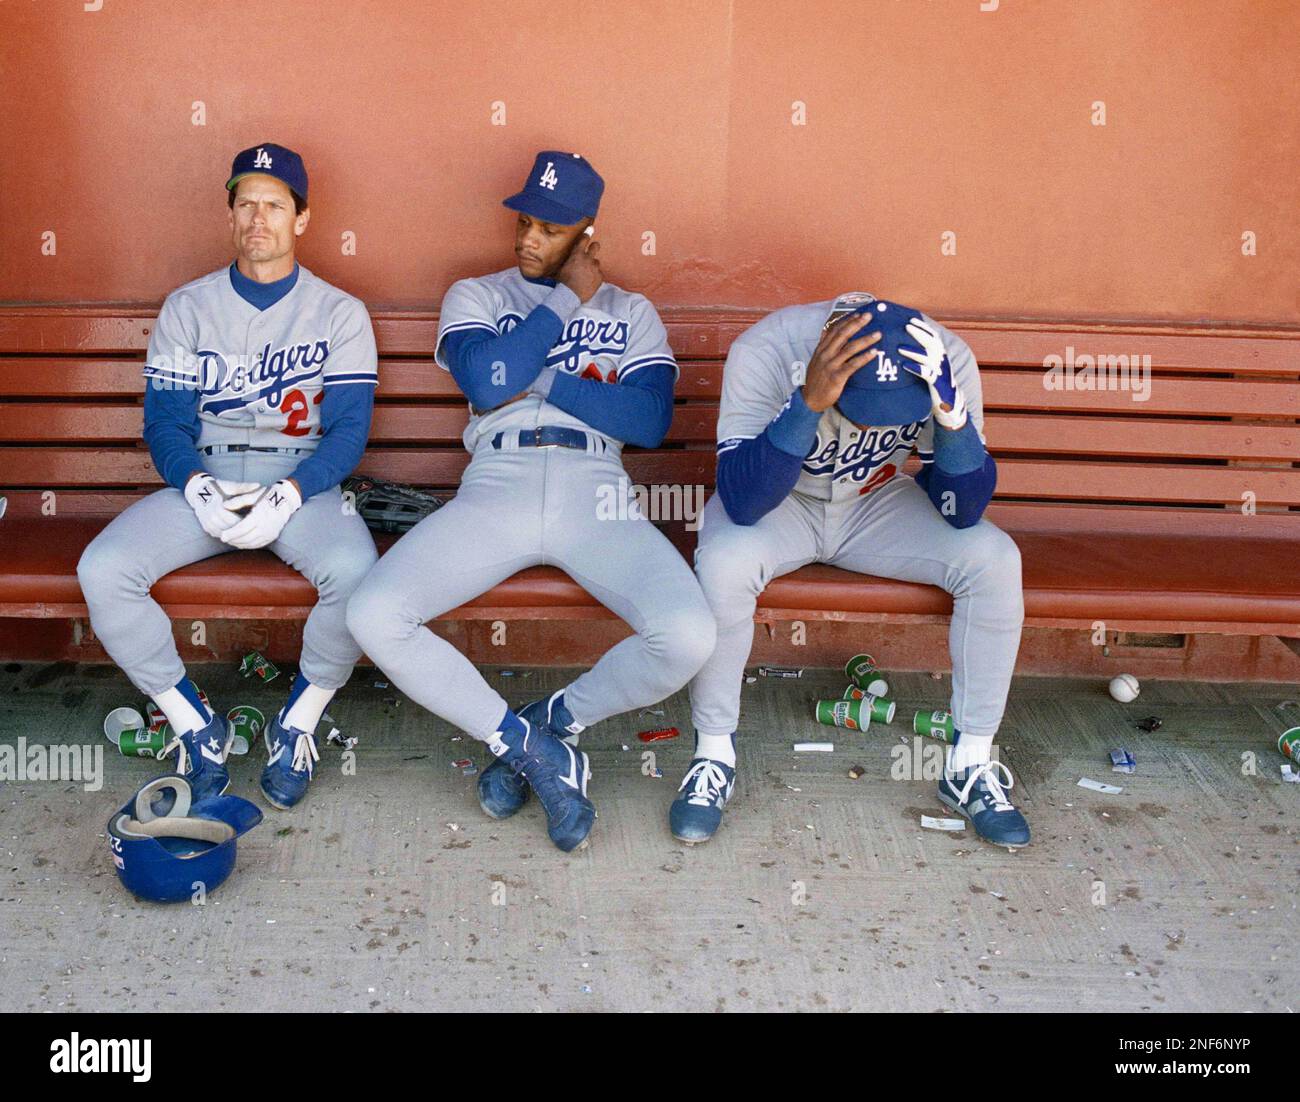 Los Angeles Dodgers players Brett Butler, left, Darryl Strawberry, middle,  and Lenny Harris, right, sit in the dugout after the final out as the San  Francisco Giants beat them 4-1 at Candlestick